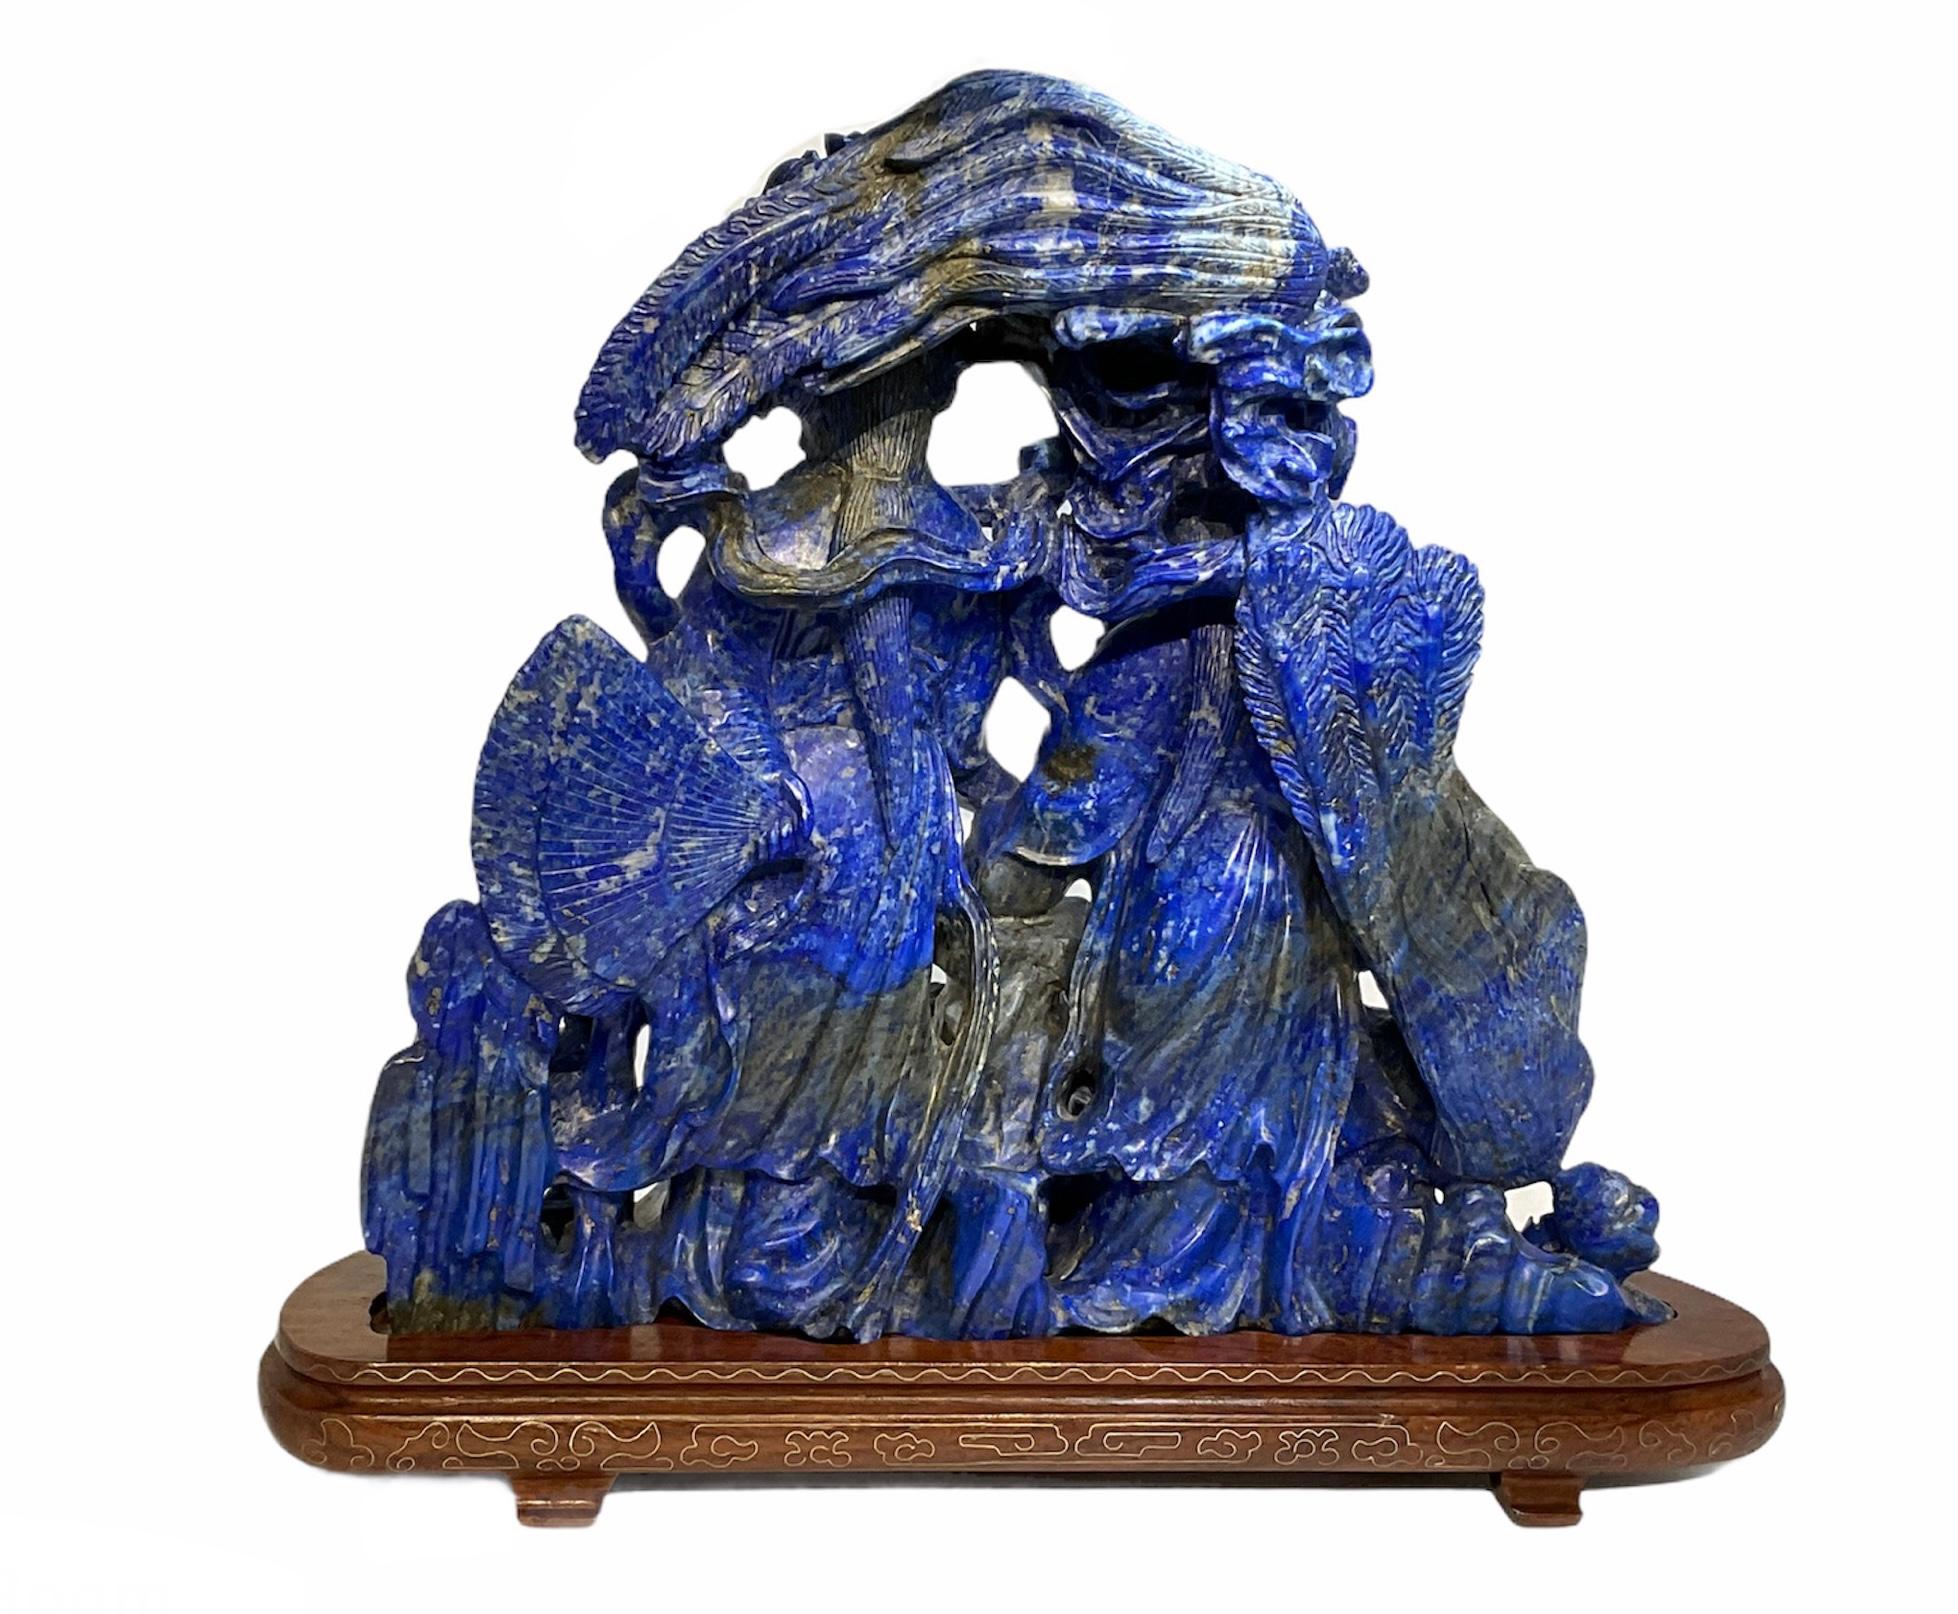 Hand-Carved Chinese Lapis Lazuli Carved Group of Figures Sculpture For Sale